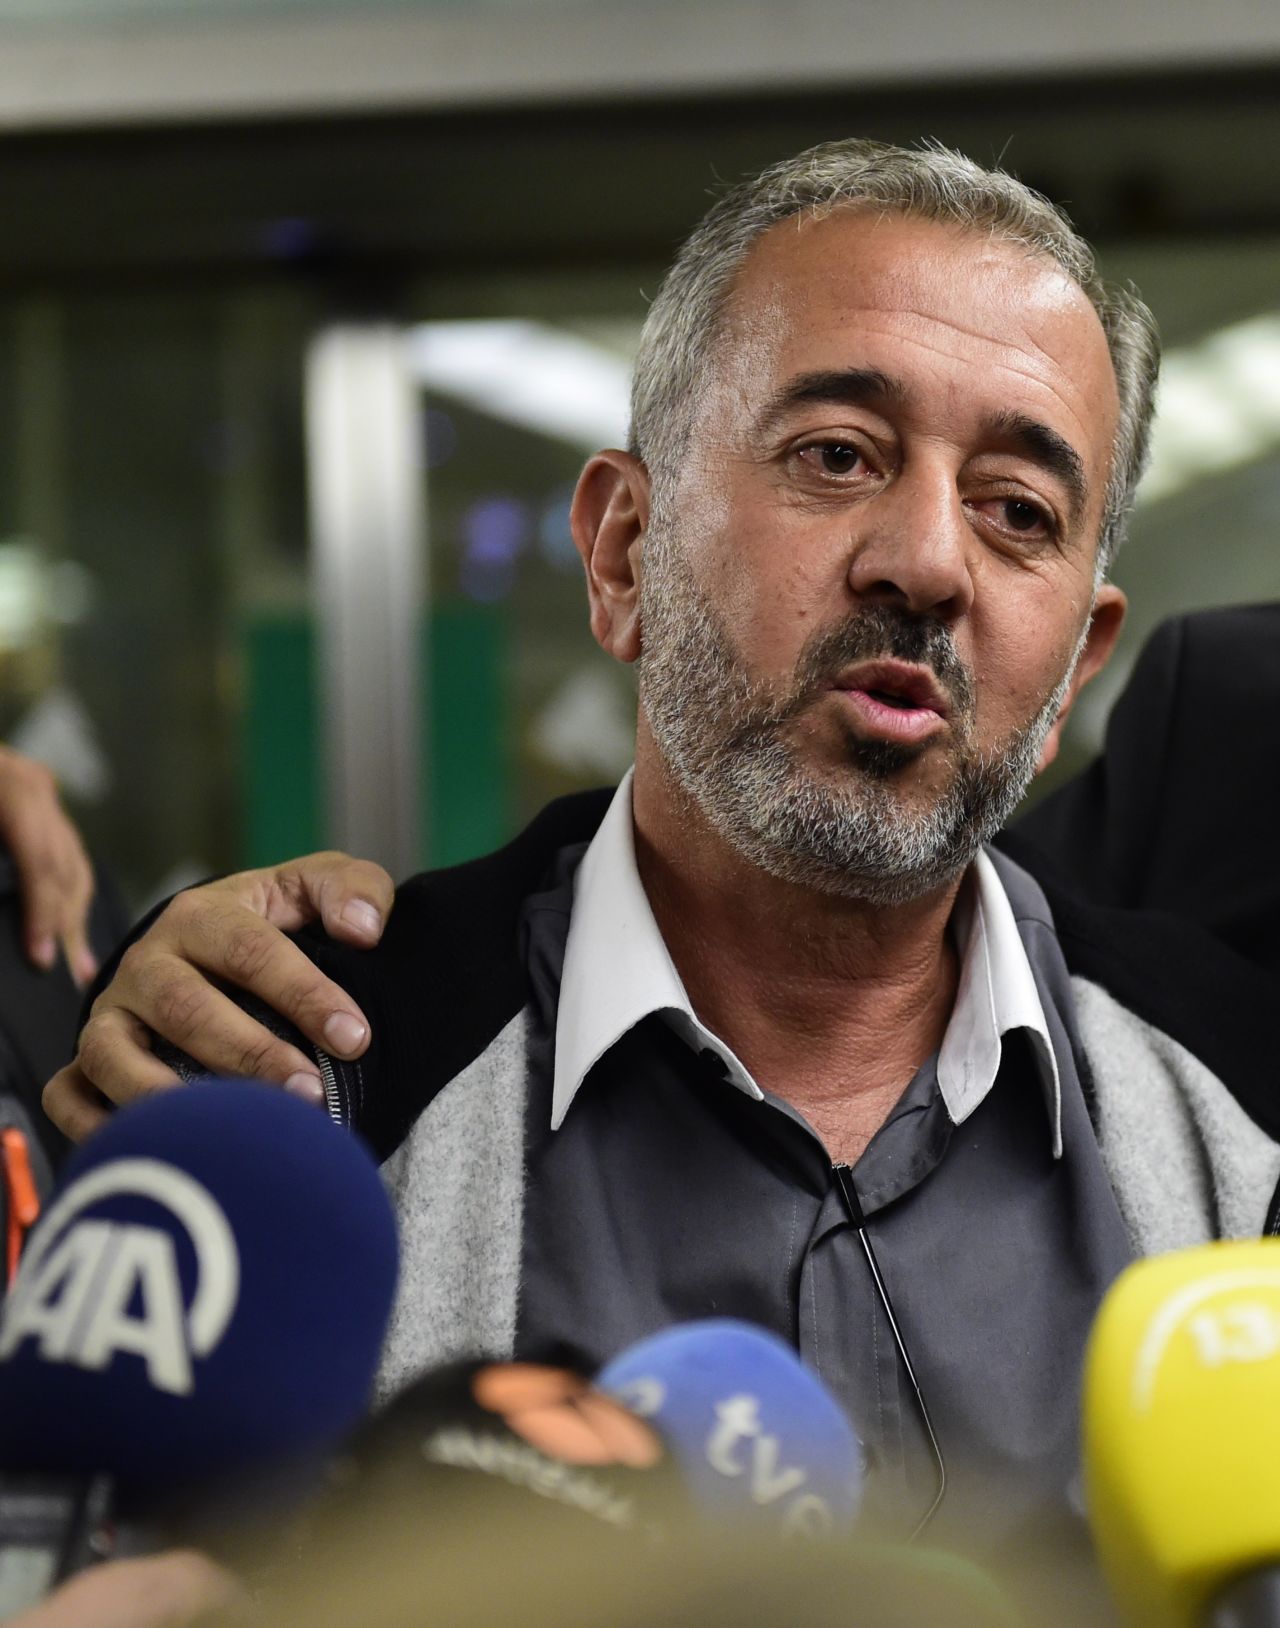 Osamsa Abdul Mohsen addresses the media at Atocha train station, Madrid. The Spanish footballing school CENAFE offered the Syrian a coaching role and a home for his family.